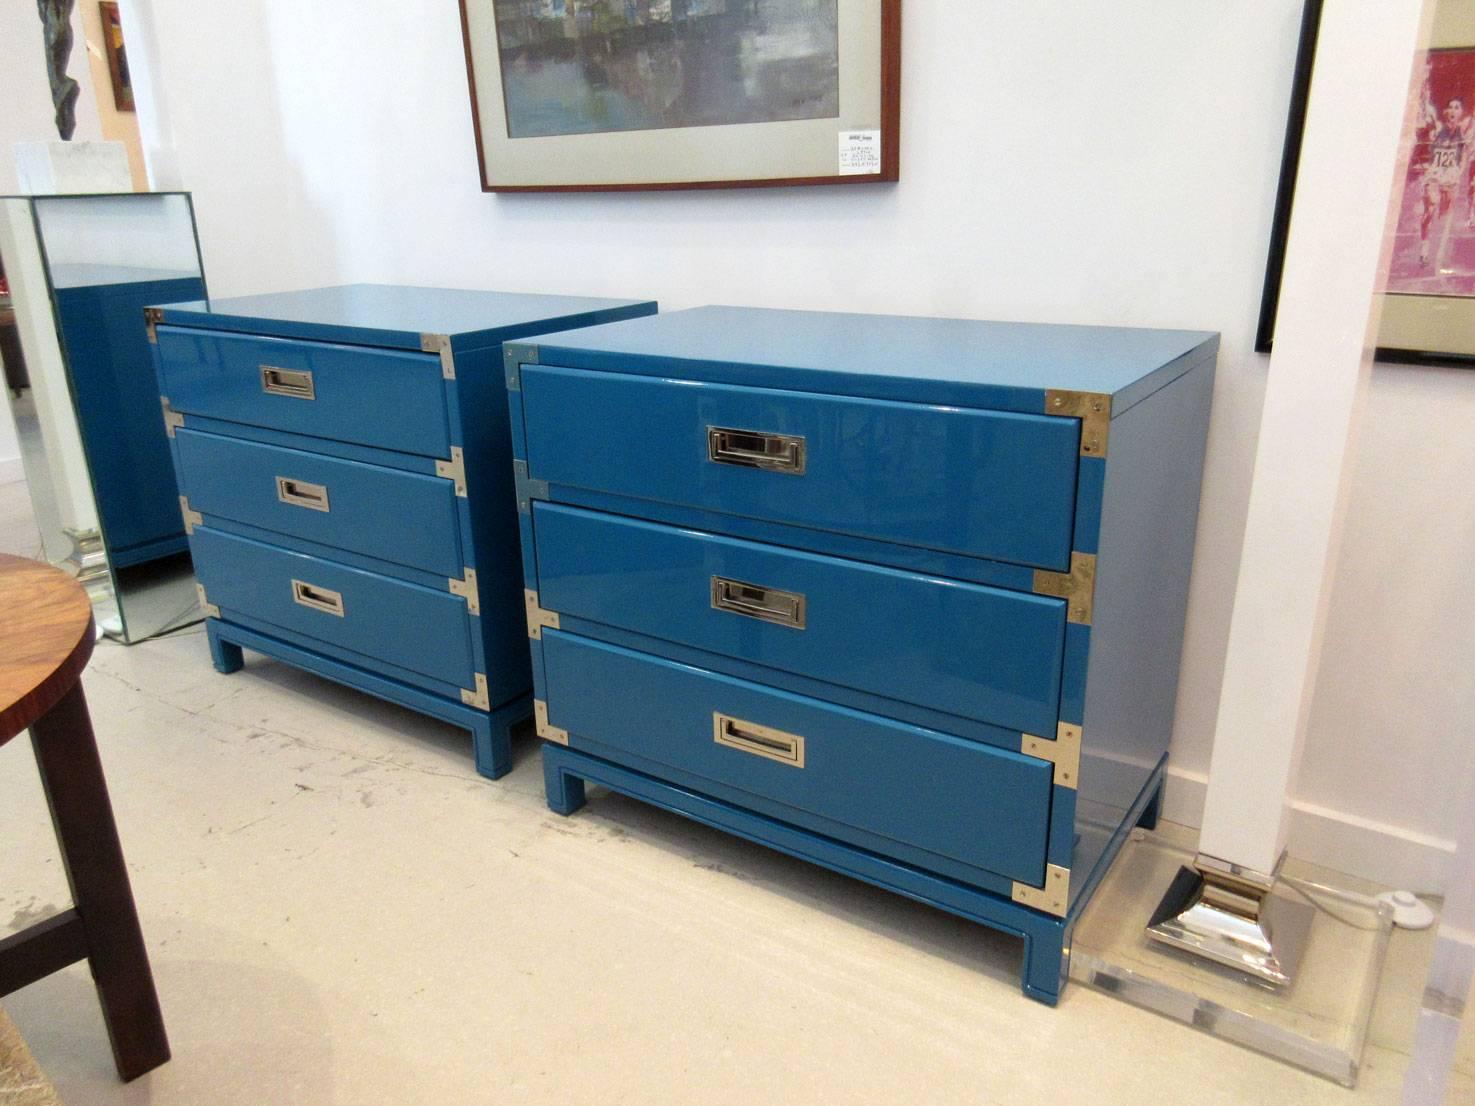 Pair of ocean blue lacquered chests of drawers with nickel-plated hardware. The chests have been professionally restored. However there are some blemishes and scratches on surface- no color loss.